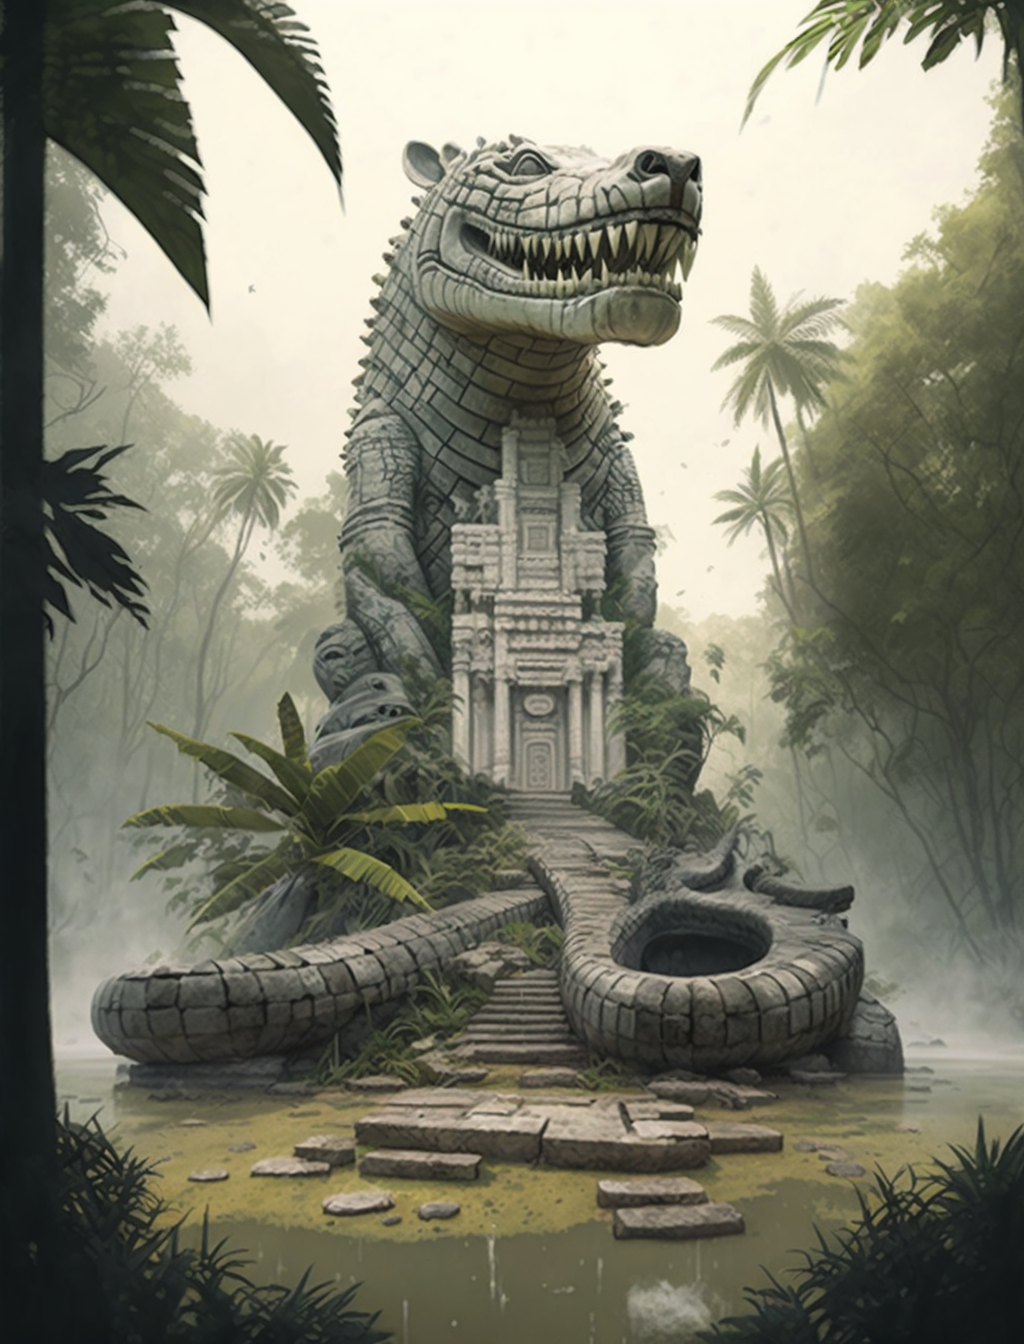 An illustration of a massive stone crocodile with a somewhat doglike head, sitting upright, with an elaborate stone entryway with colums on either side. It is deep in a swamp of still water and palmlike leaves.